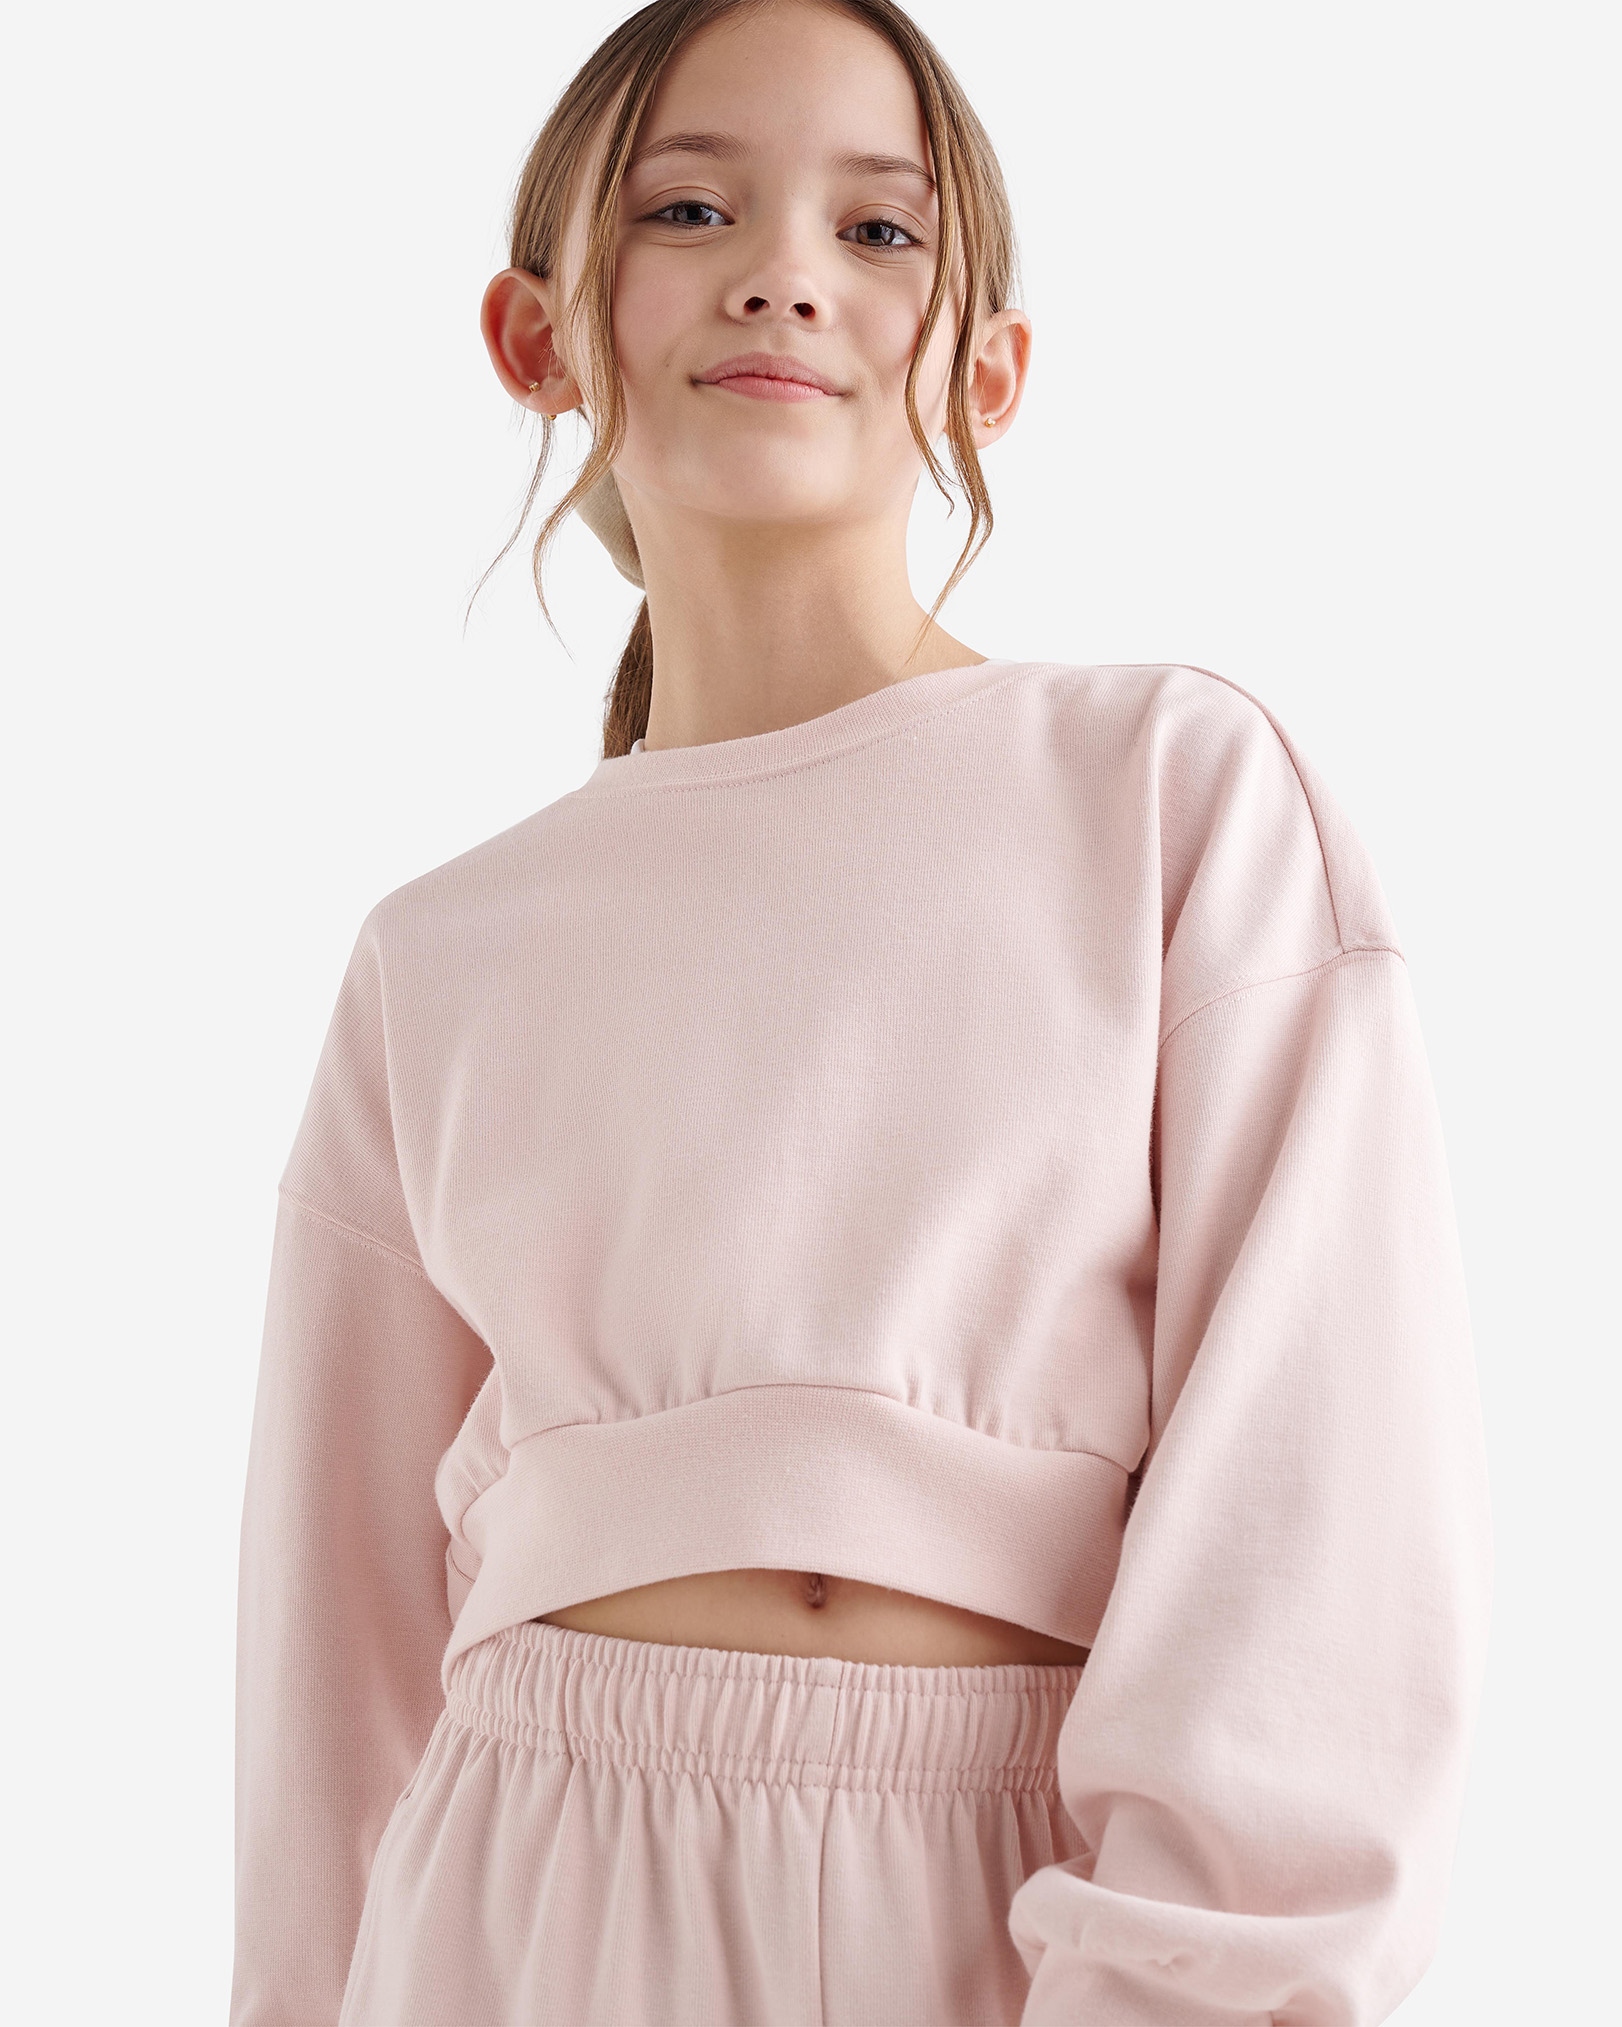 Roots Girl's Warm-Up Bubble Crew Sweatshirt in Pearl Pink